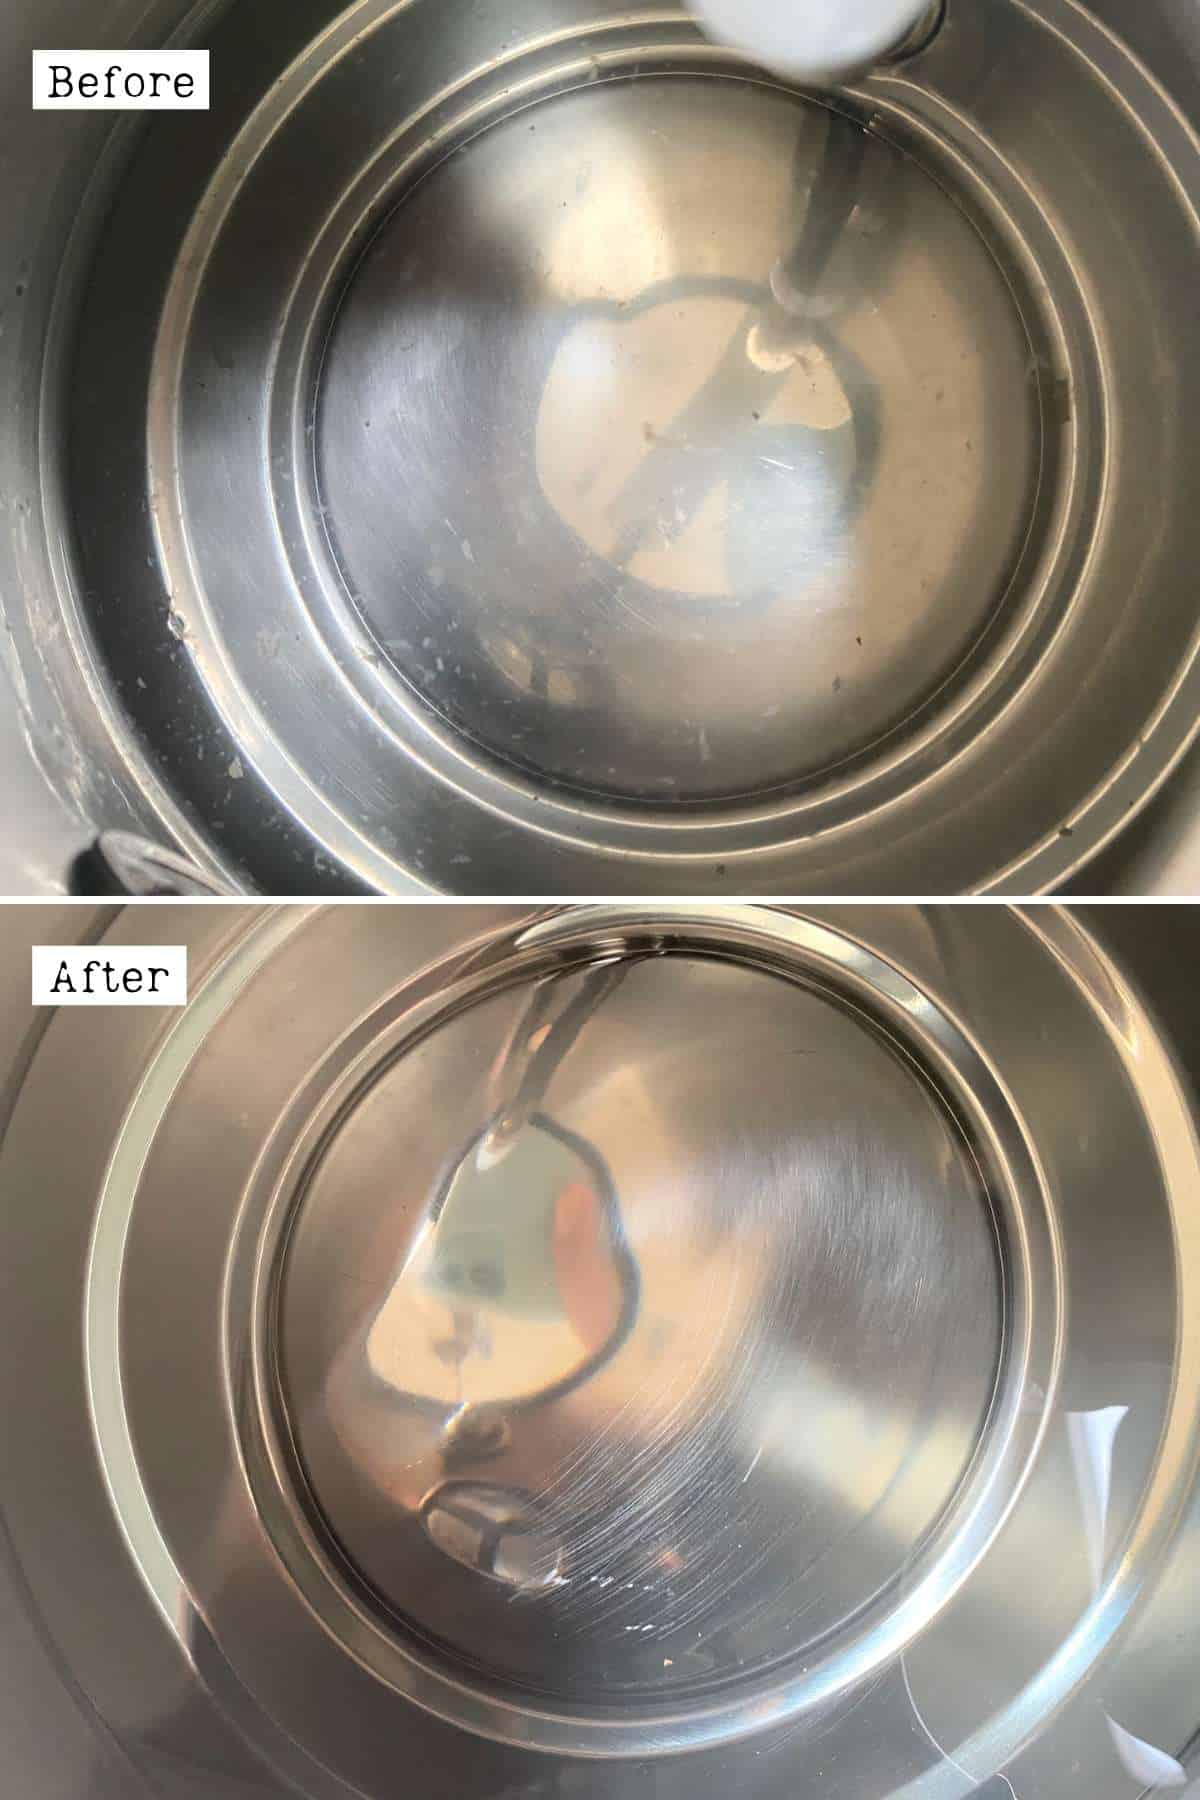 https://www.alphafoodie.com/wp-content/uploads/2021/05/How-to-naturally-clean-the-kettle-Before-and-after-cleaning-a-kettle.jpg